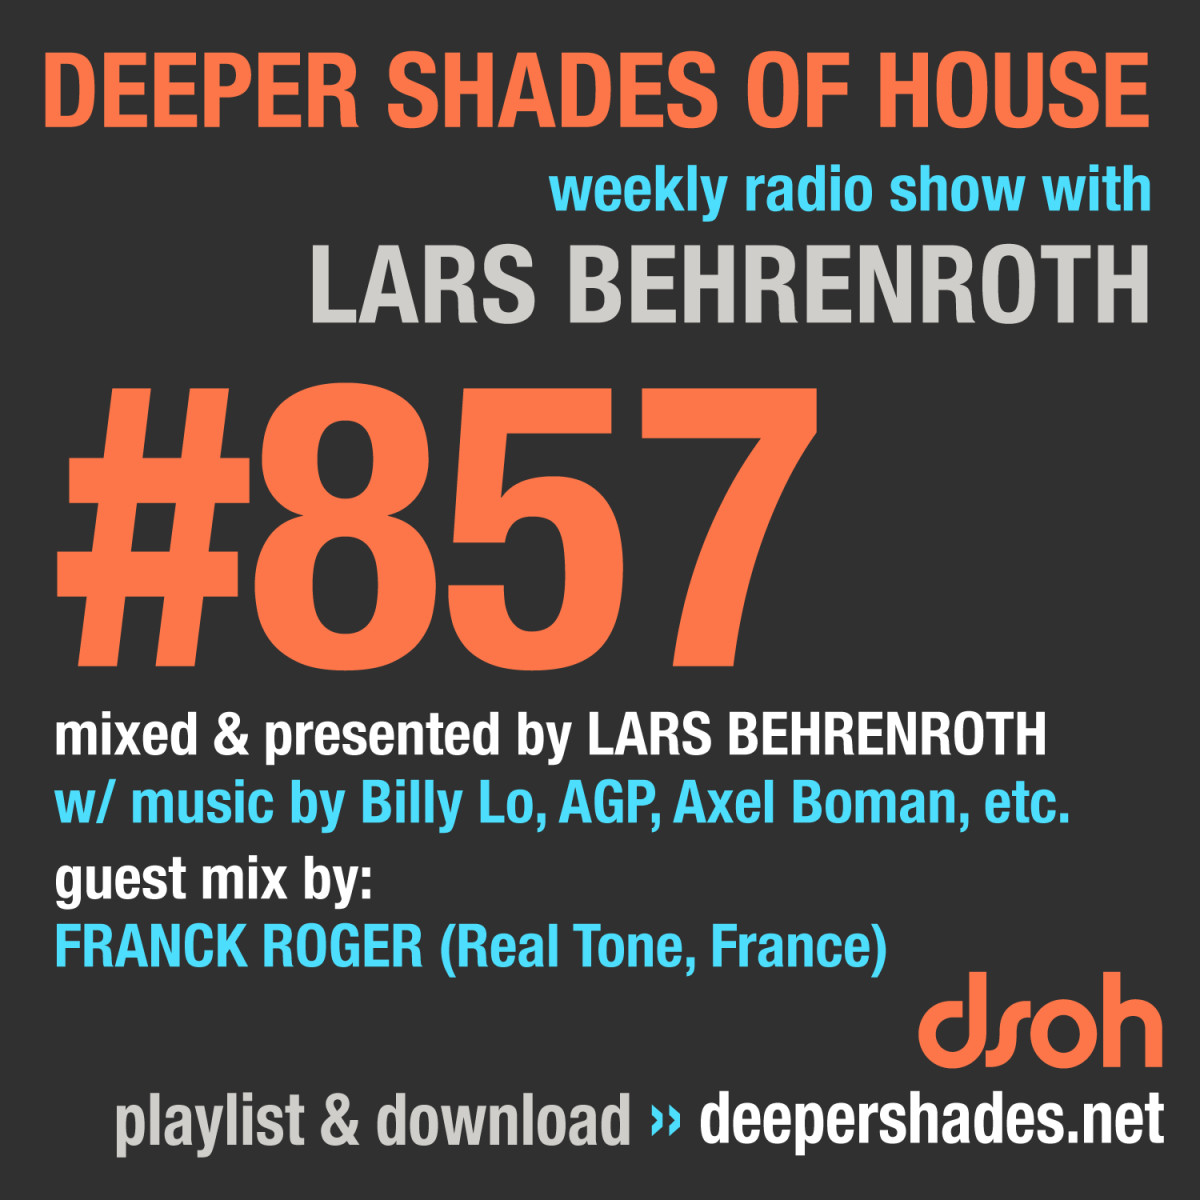 #nowplaying on radio.deepershades.net : Lars Behrenroth w/ exclusive guest mix by FRANCK ROGER (Real Tone Rec, France) - DSOH 857 Deeper Shades Of House #deephouse #livestream #dsoh #housemusic